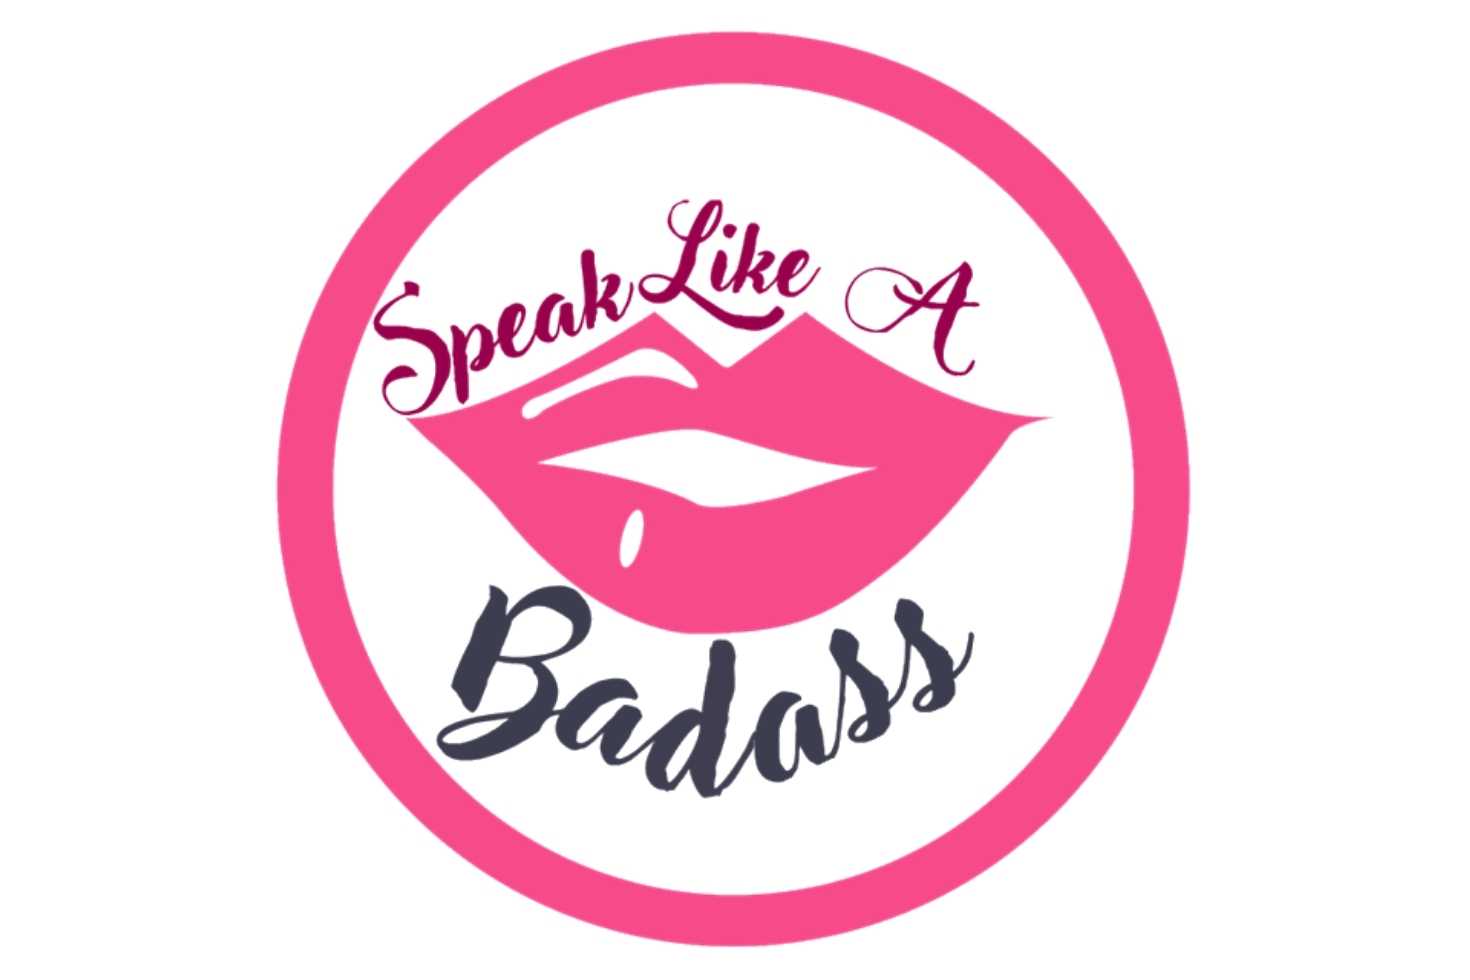 Pink lips inside circle with text "Speak Like A Badass"